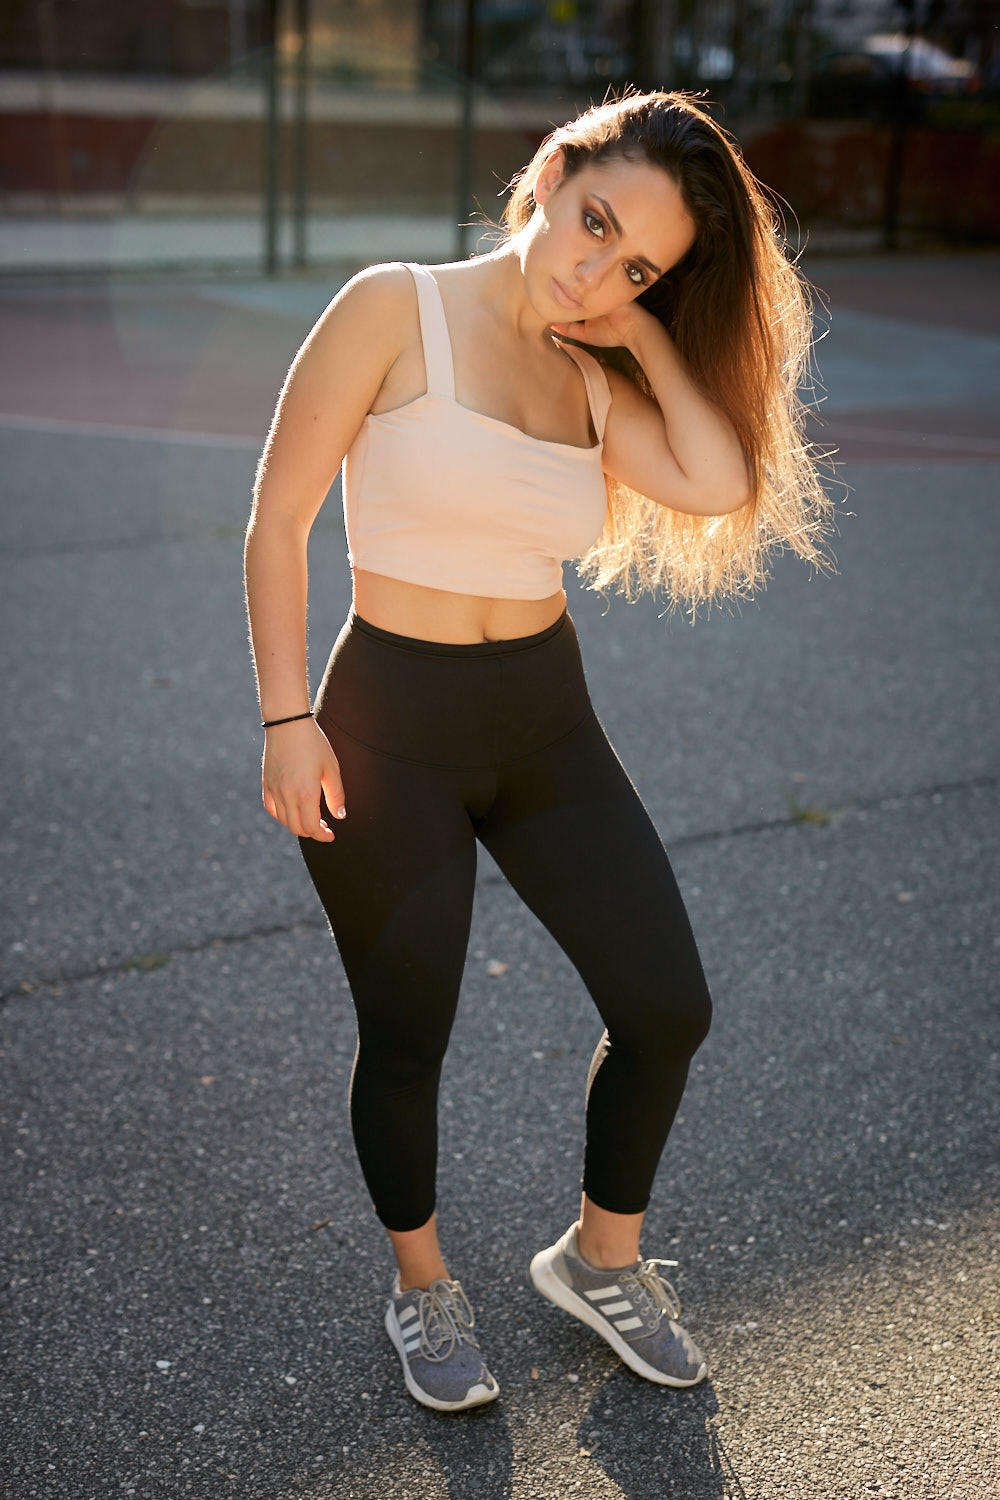 Lifestyle Photographer Dallas | Fitness Lifestyle Photography of Model on Outdoor Basketball Court